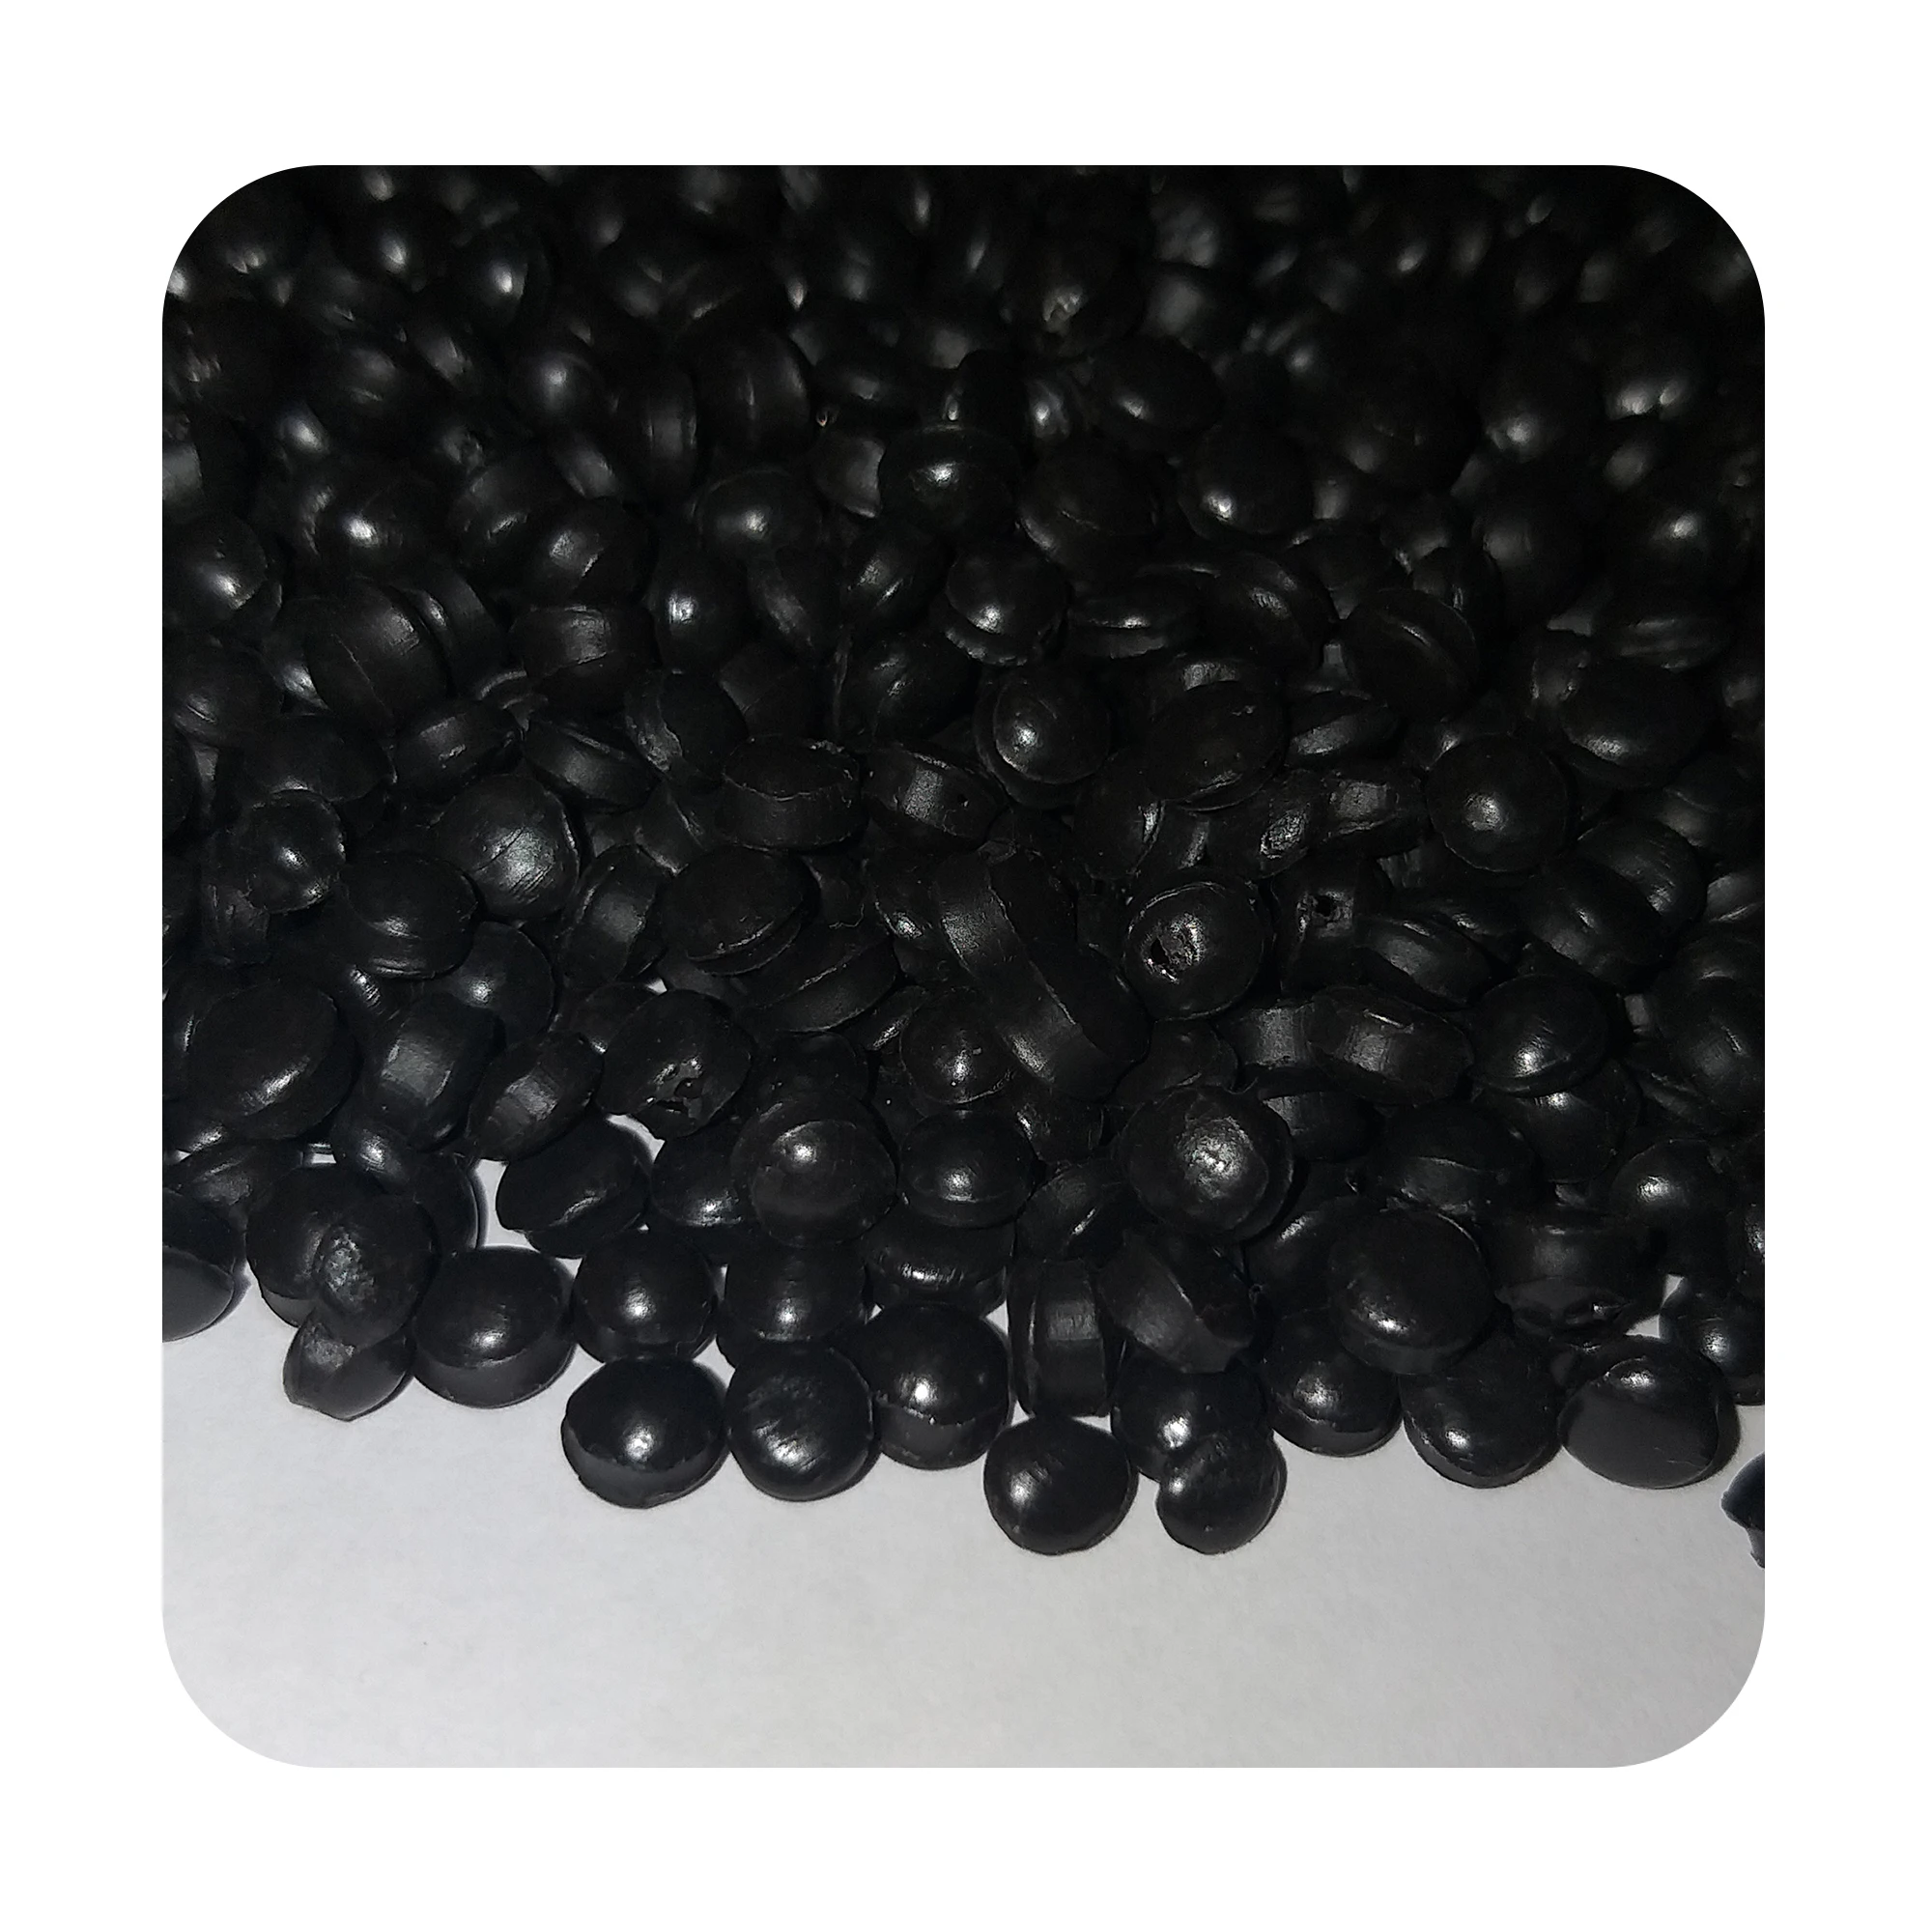 TOP Quality Granulated Polypropylene PP for General Plastics Usage, Broad Scope of Application, Low Prices from the Manufacturer